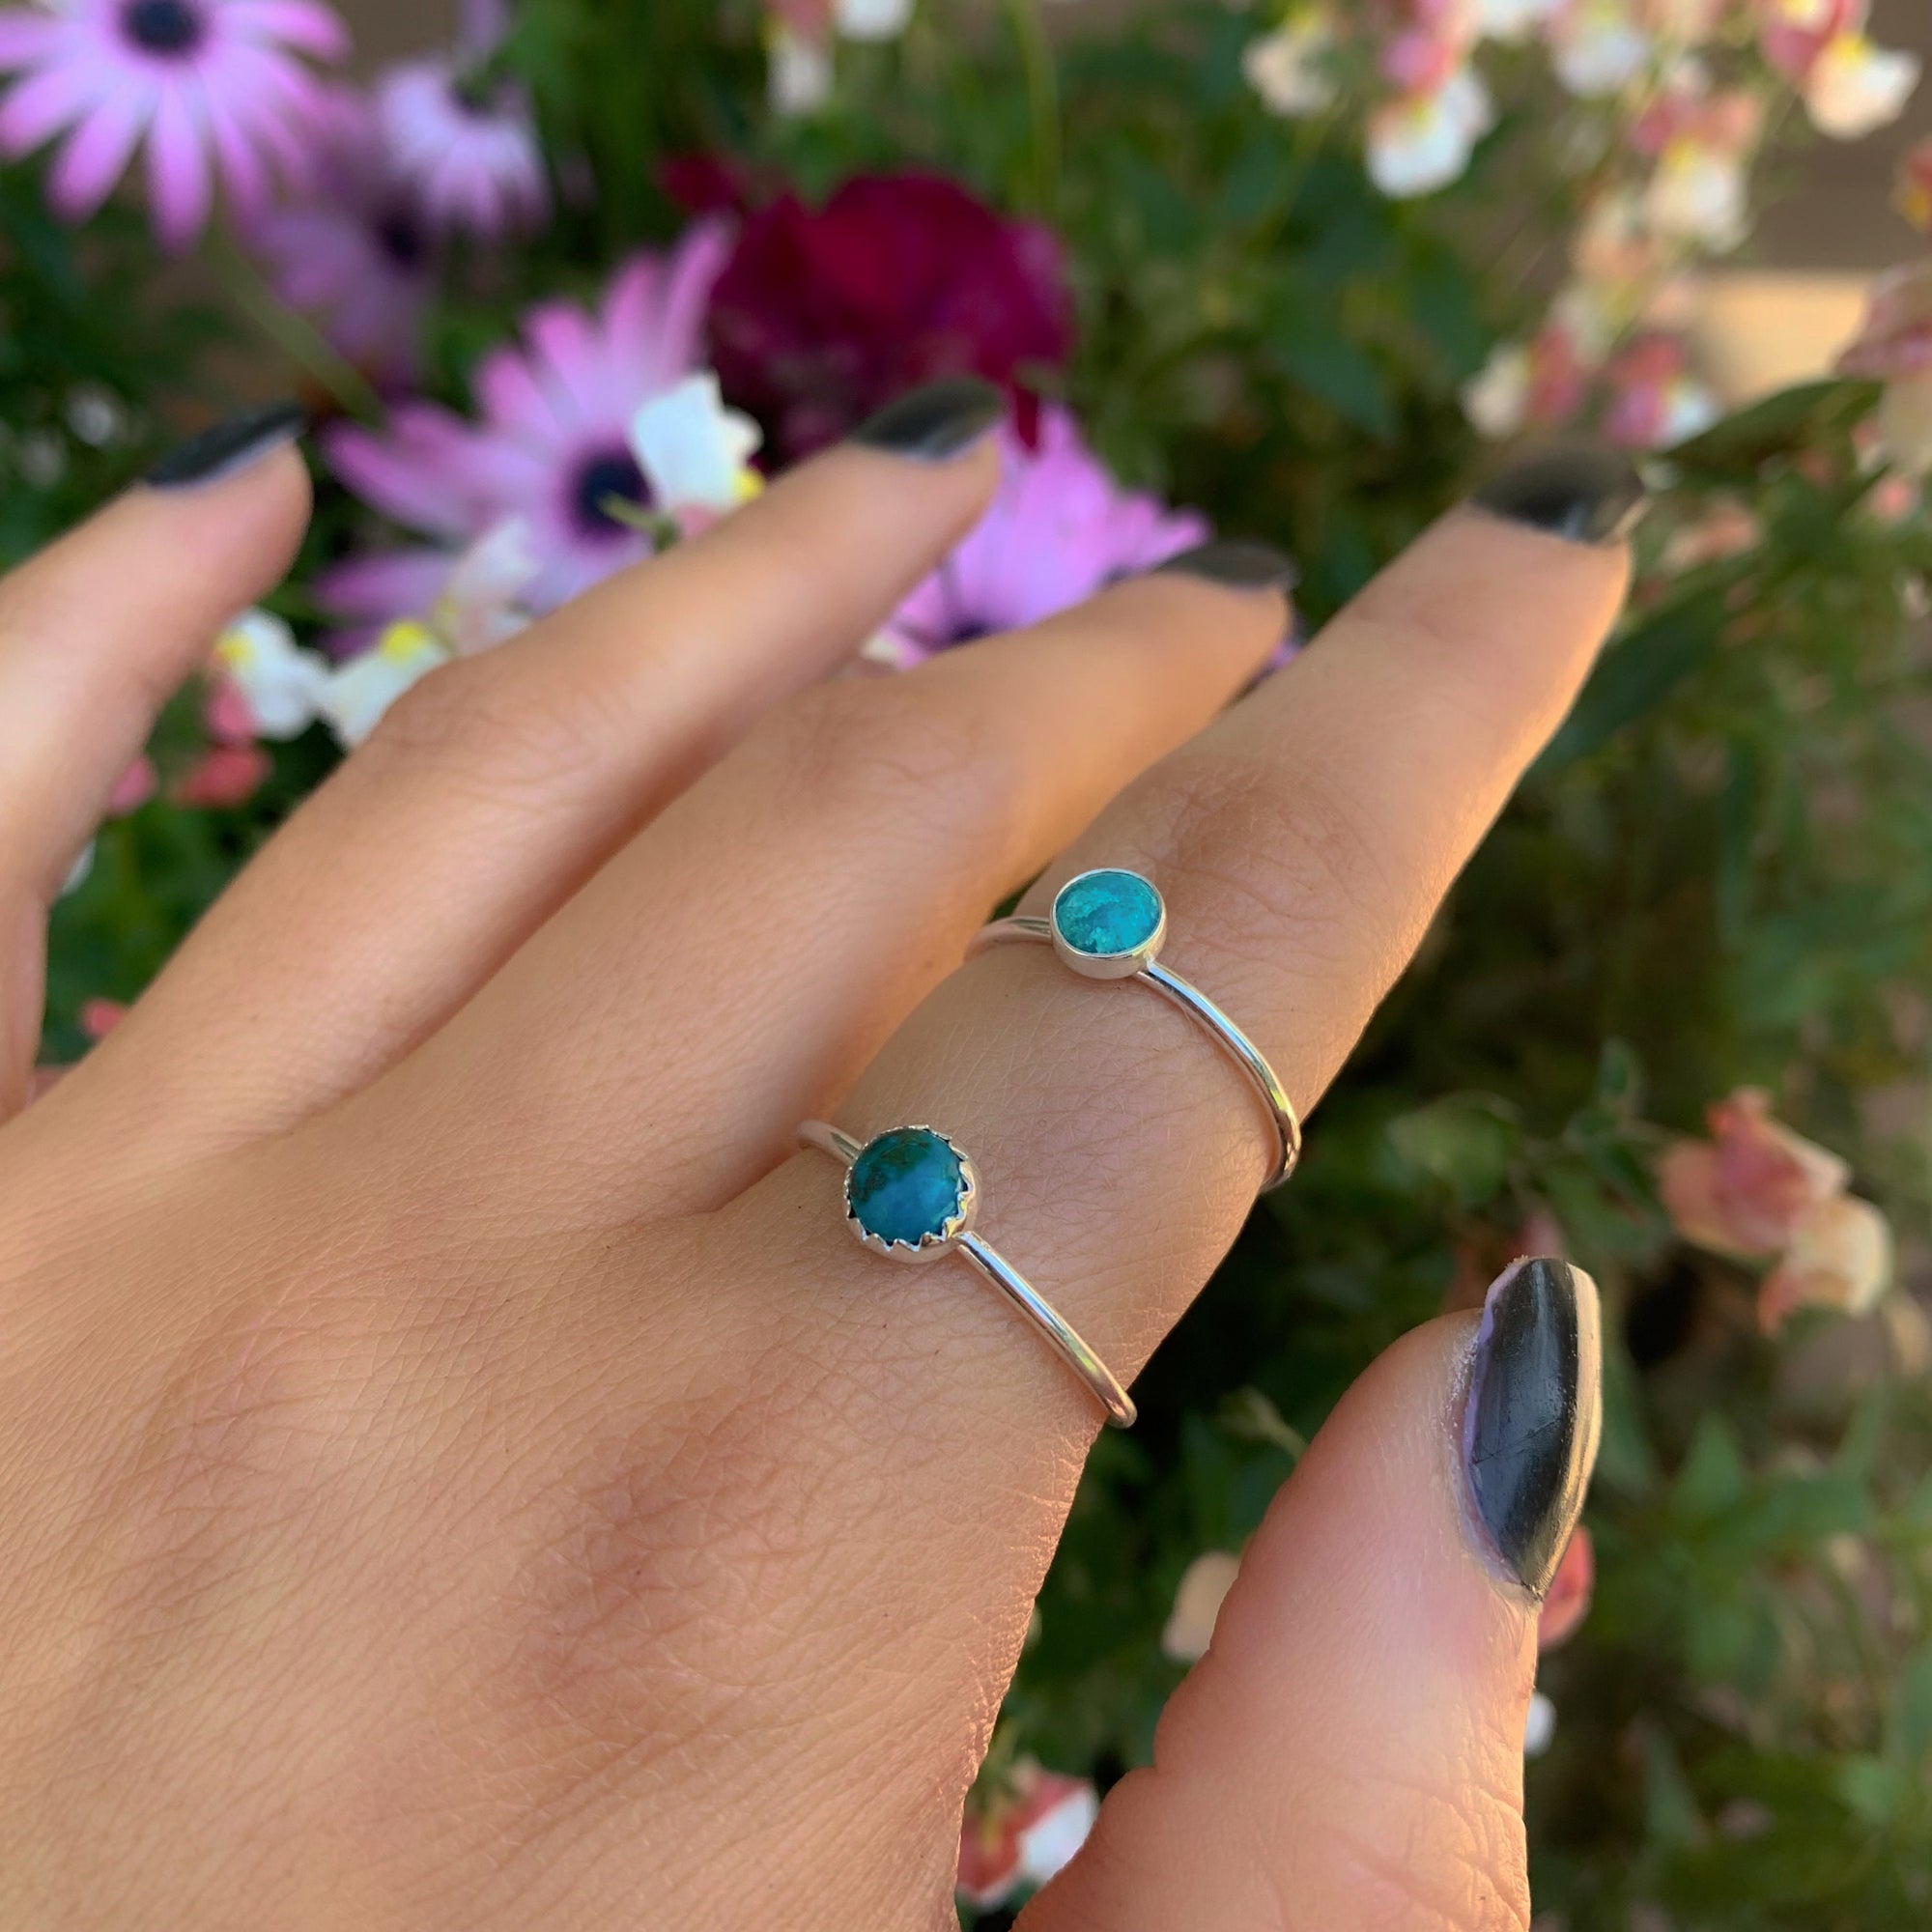 Chrysocolla Ring - Made to Order 